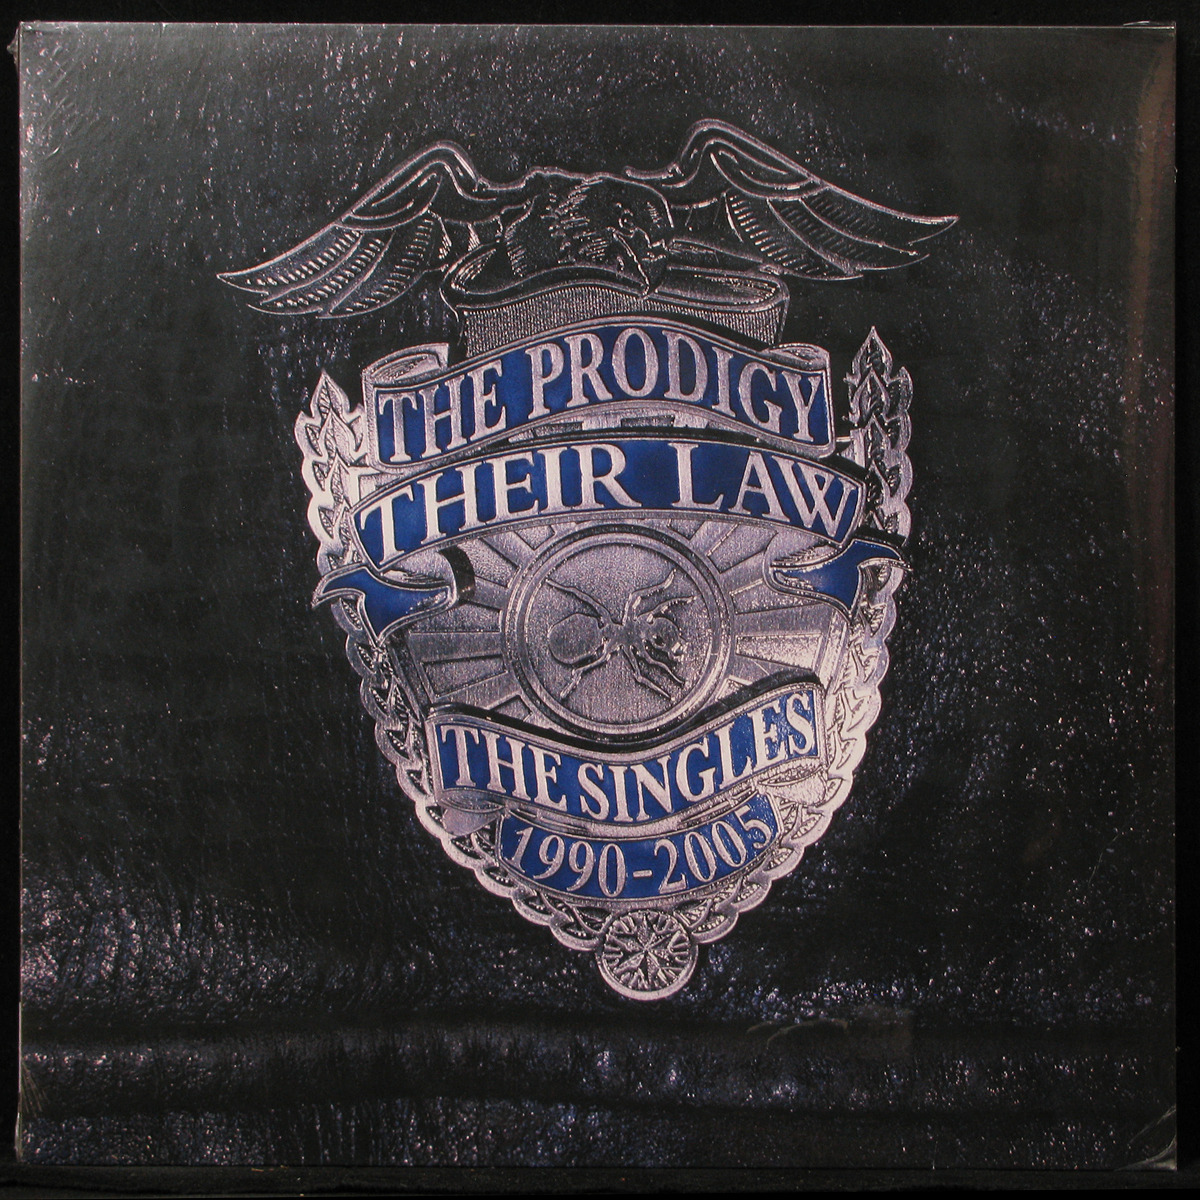 Their Law -The Singles 1990-2005